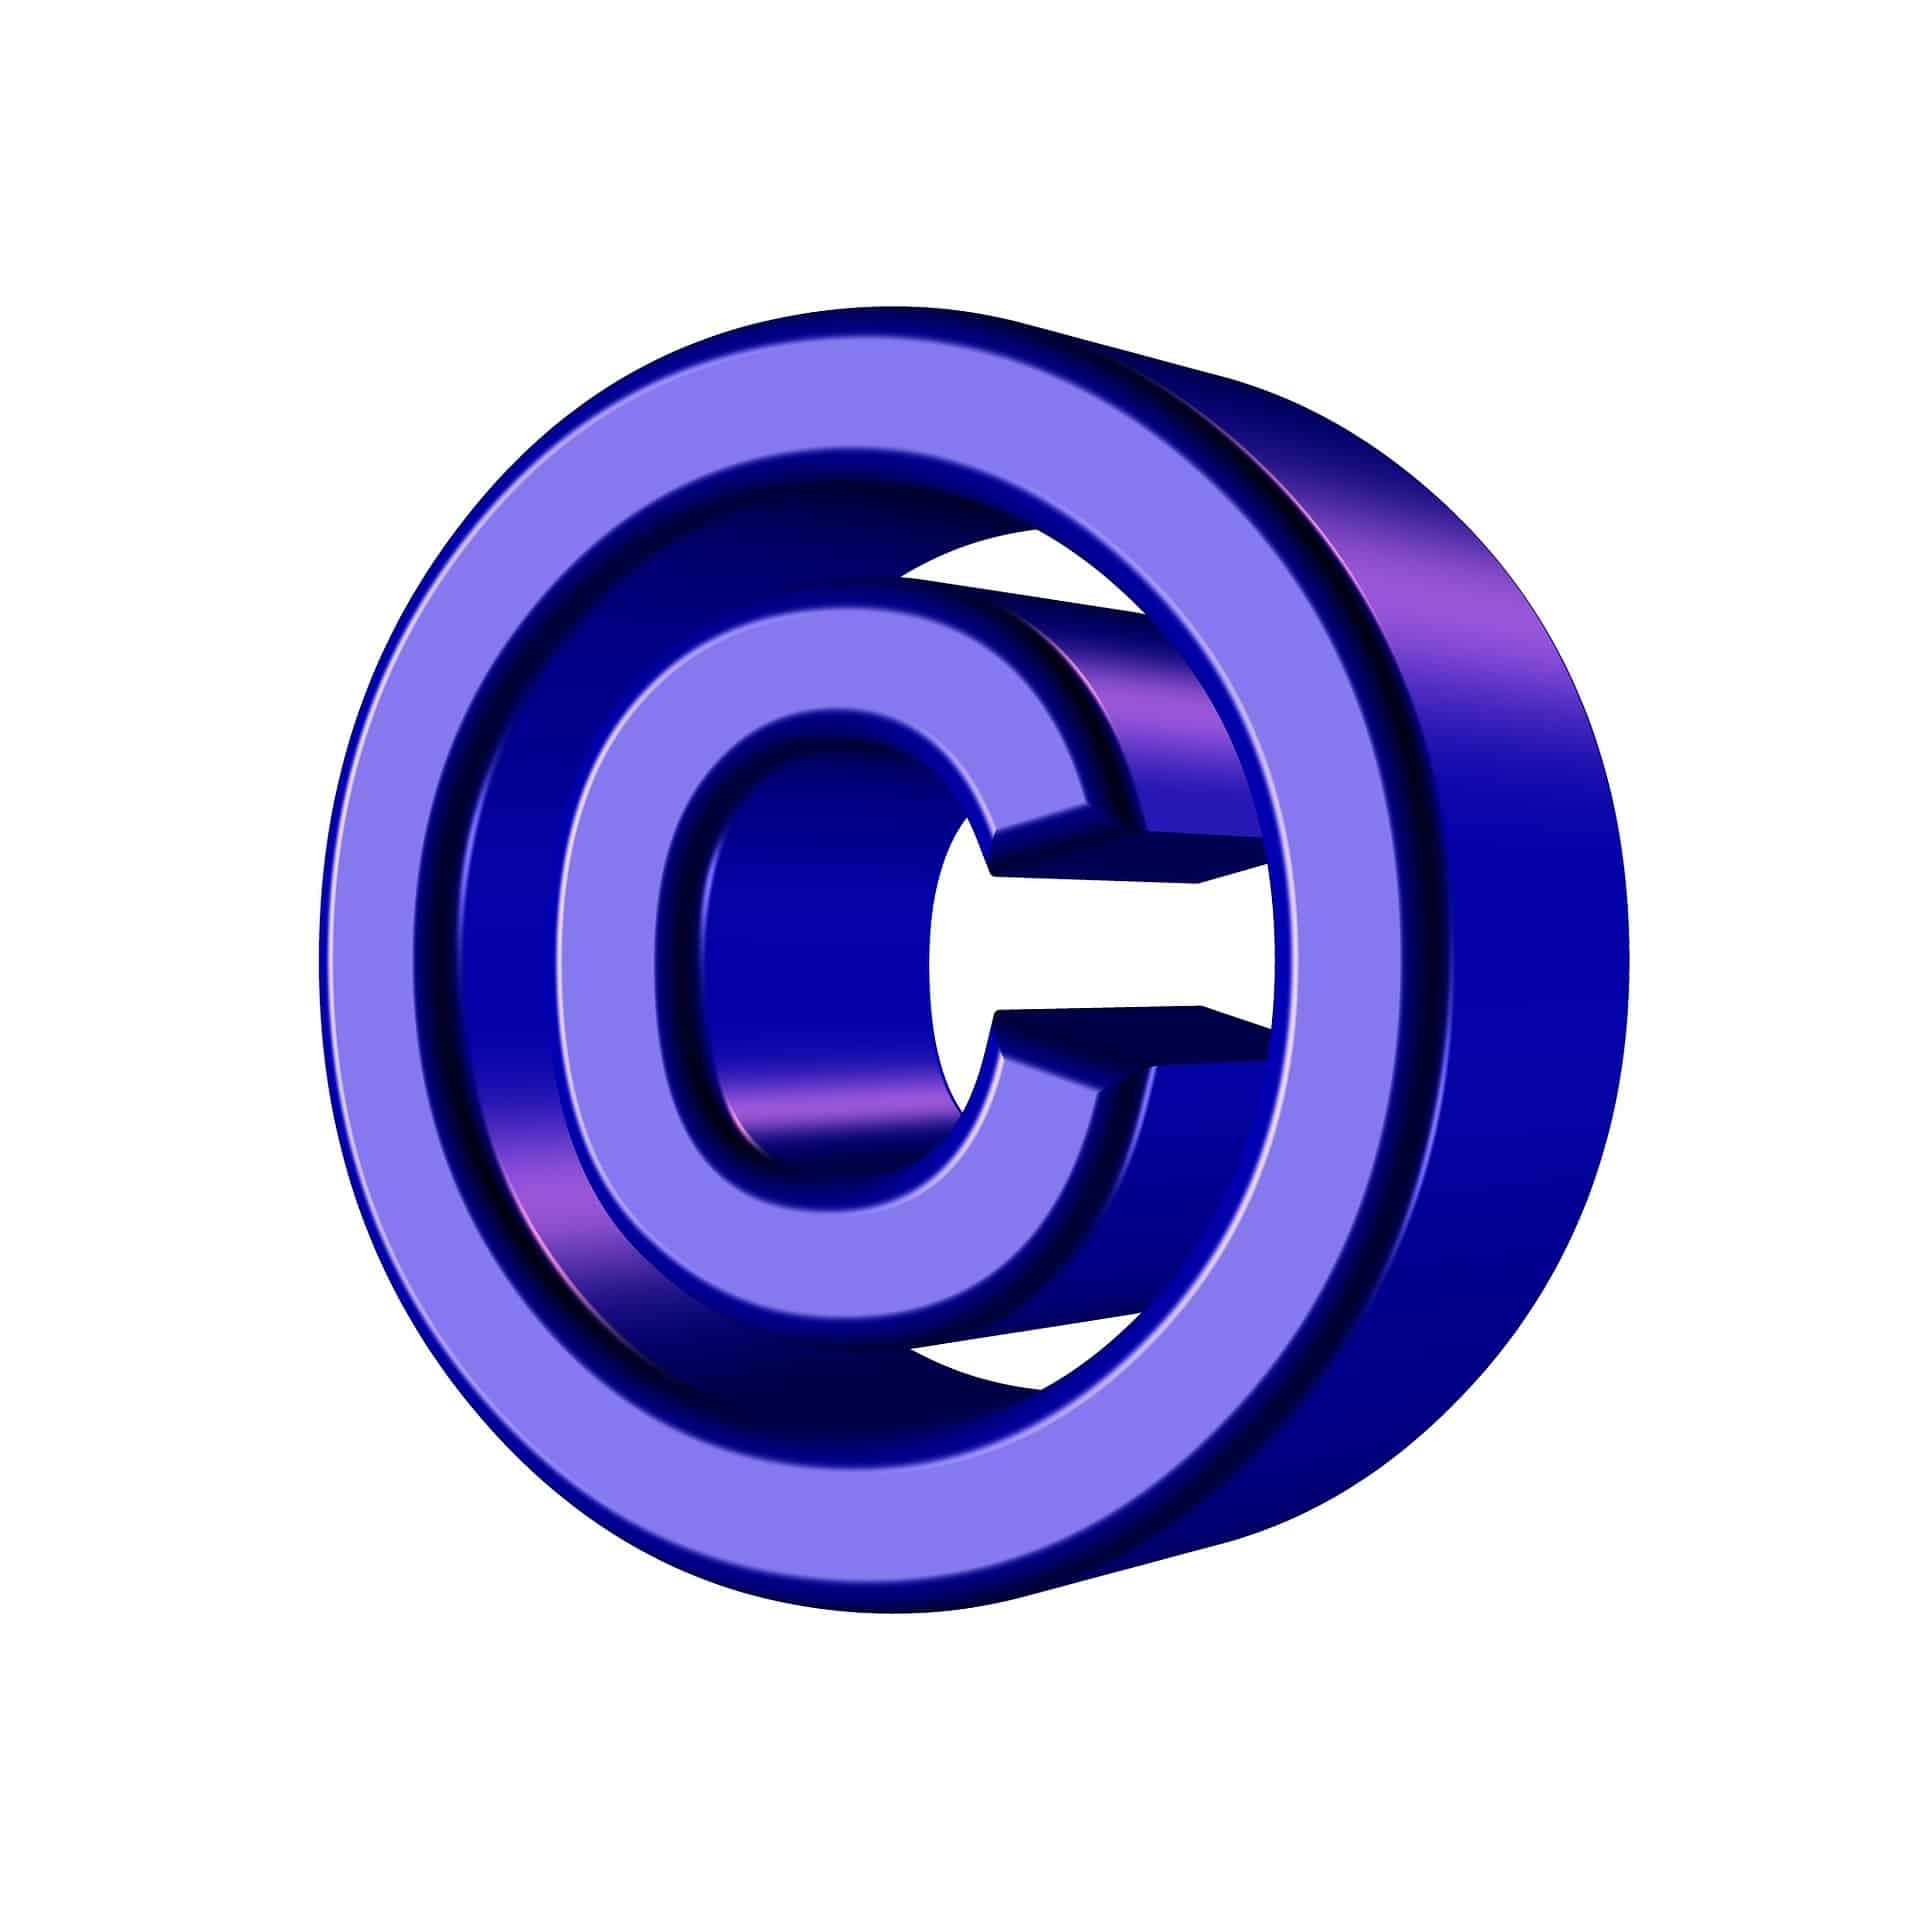 Passing On Intellectual Property: Patents, Copyrights and Beyond